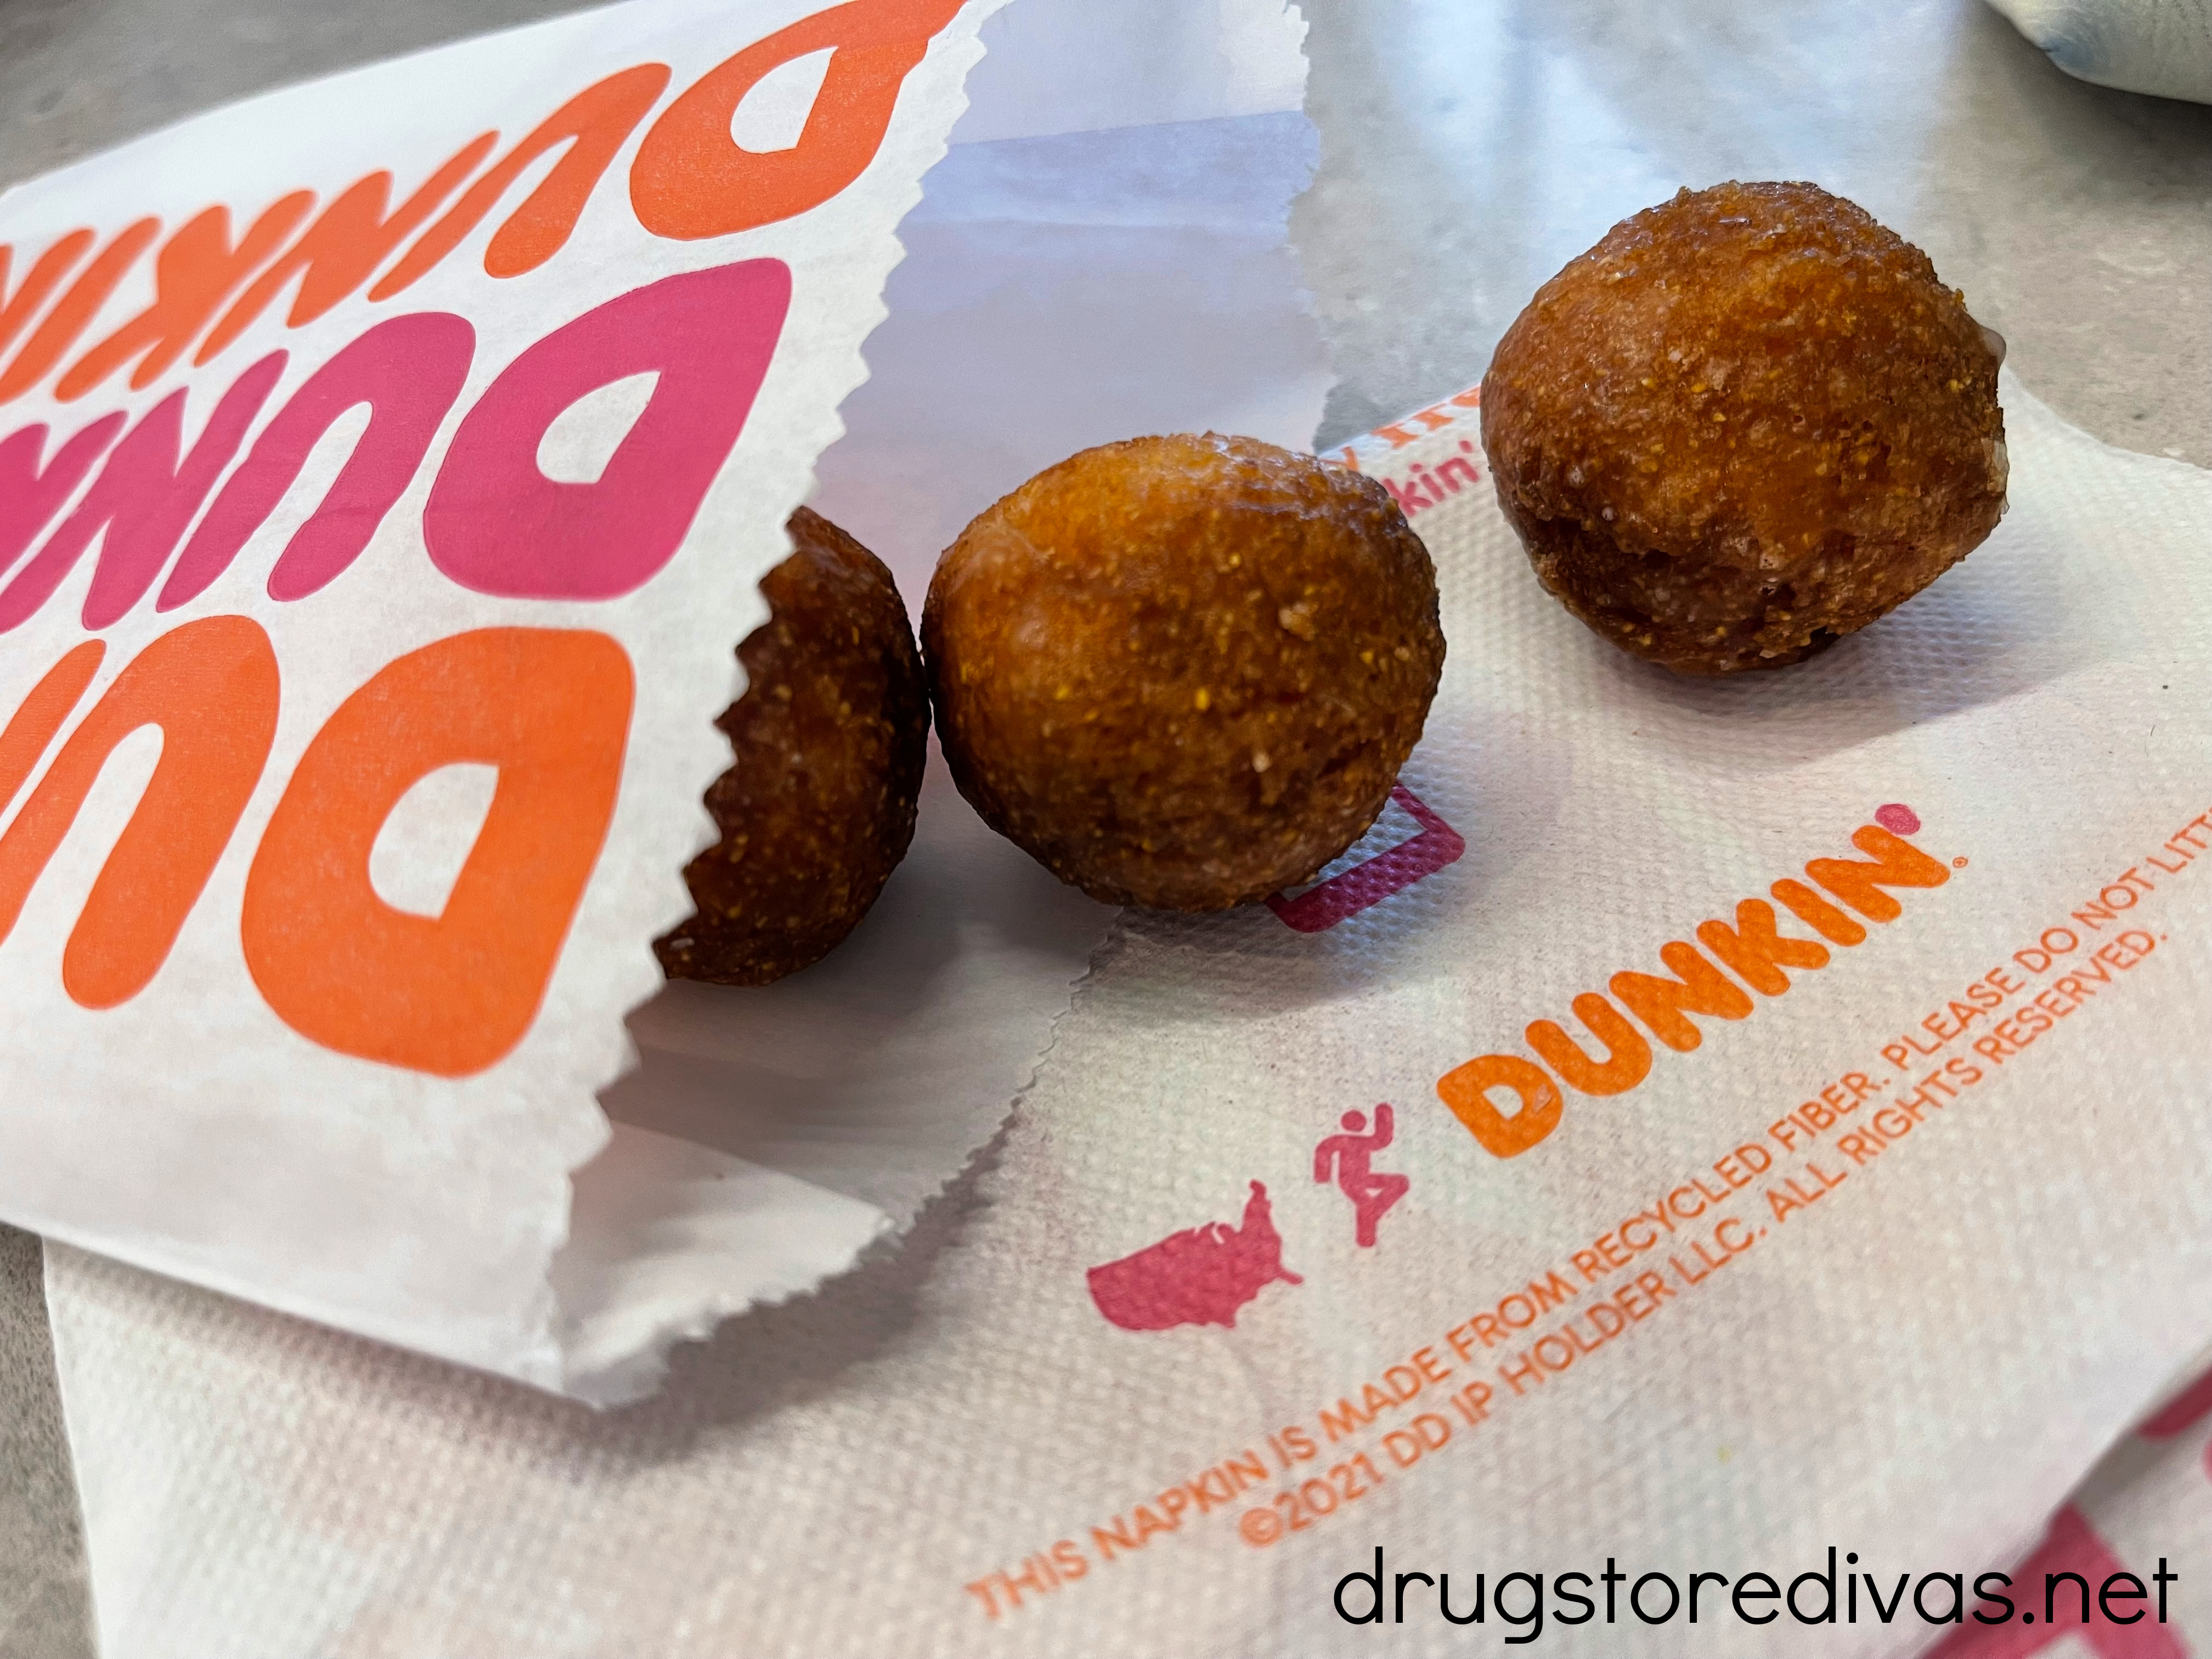 Dunkin' cornbread munchkins coming out of the bag.